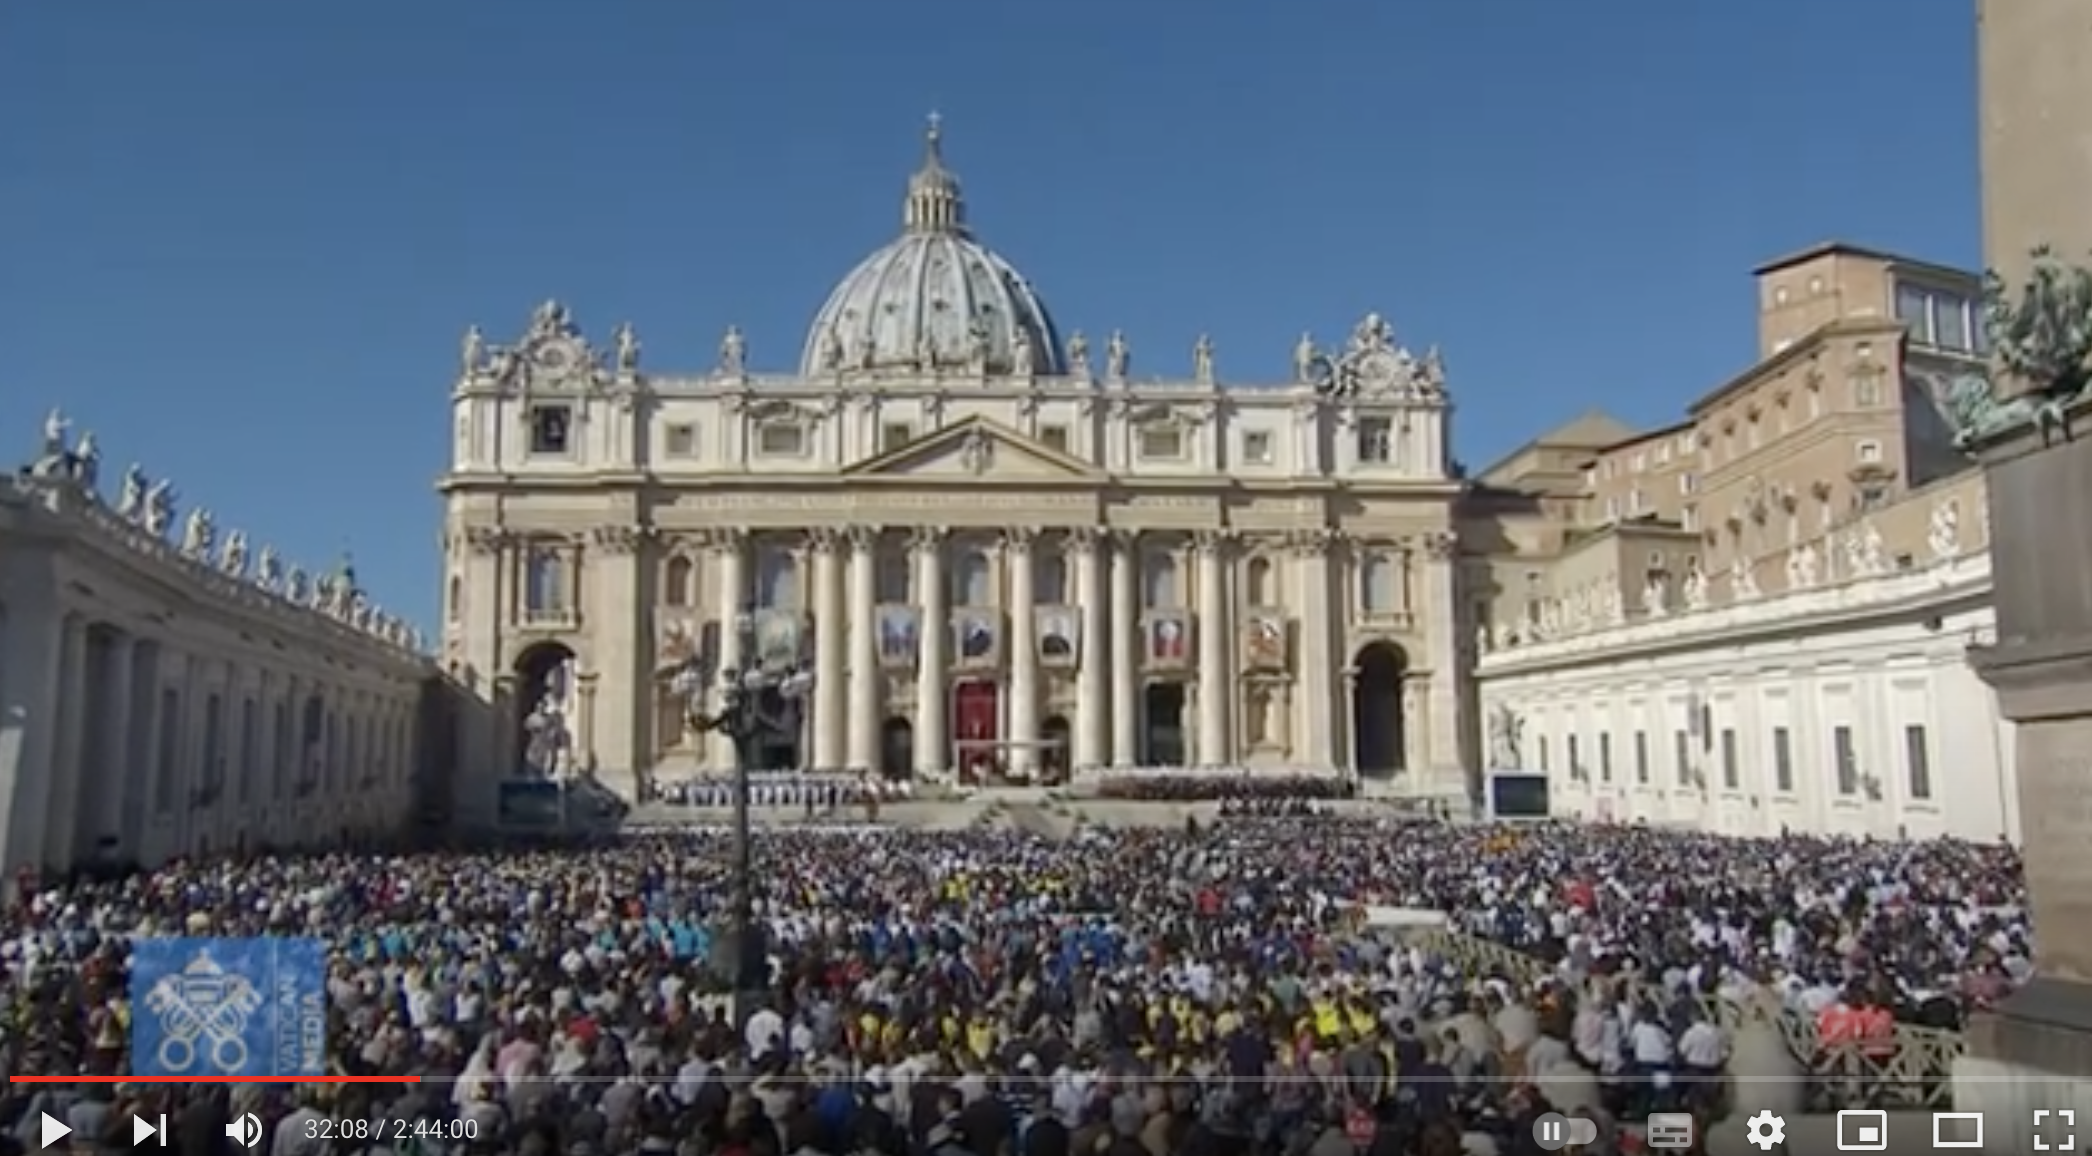 Video of the saint's canonization, full version of 16 Oct 2016